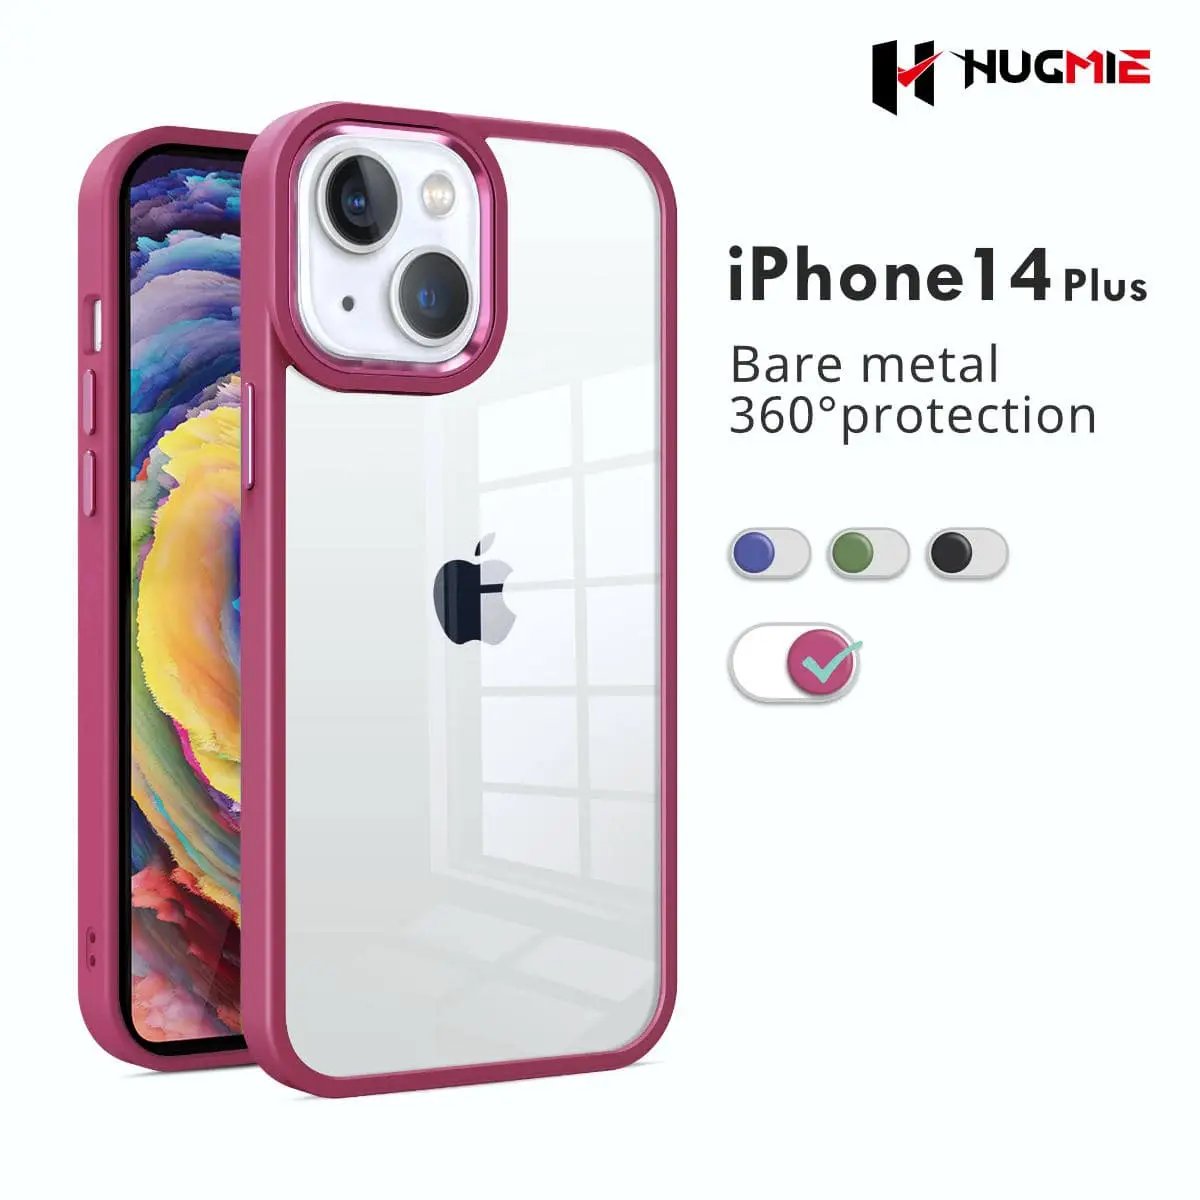 iPhone 14 Plus Clear Case Crystal Shield Red- Hugmie